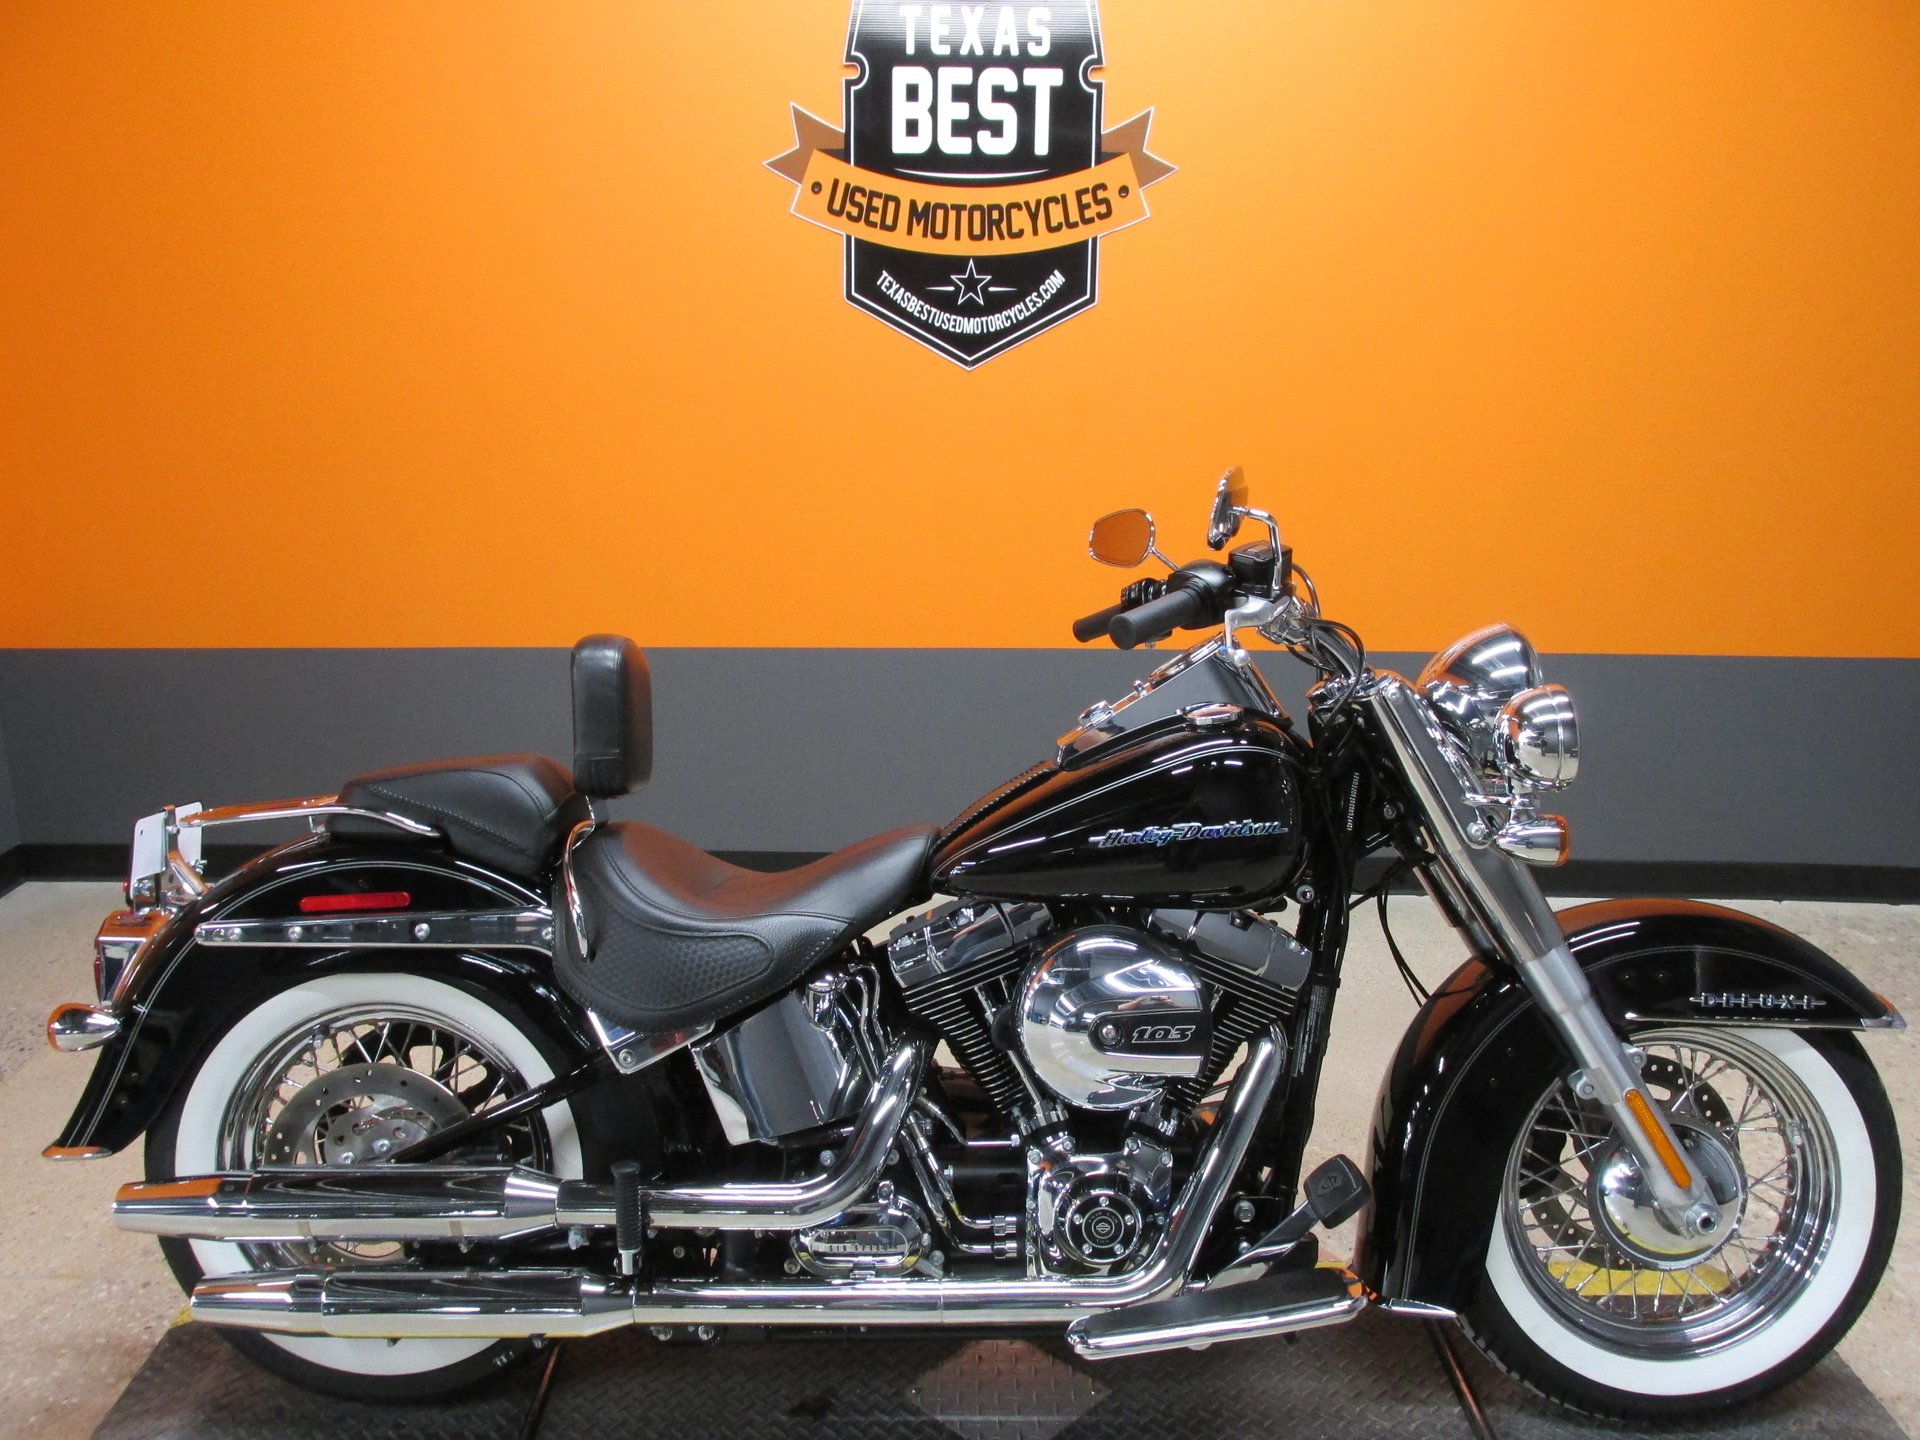 2016 Harley-Davidson Softail Deluxe | American Motorcycle Trading ...